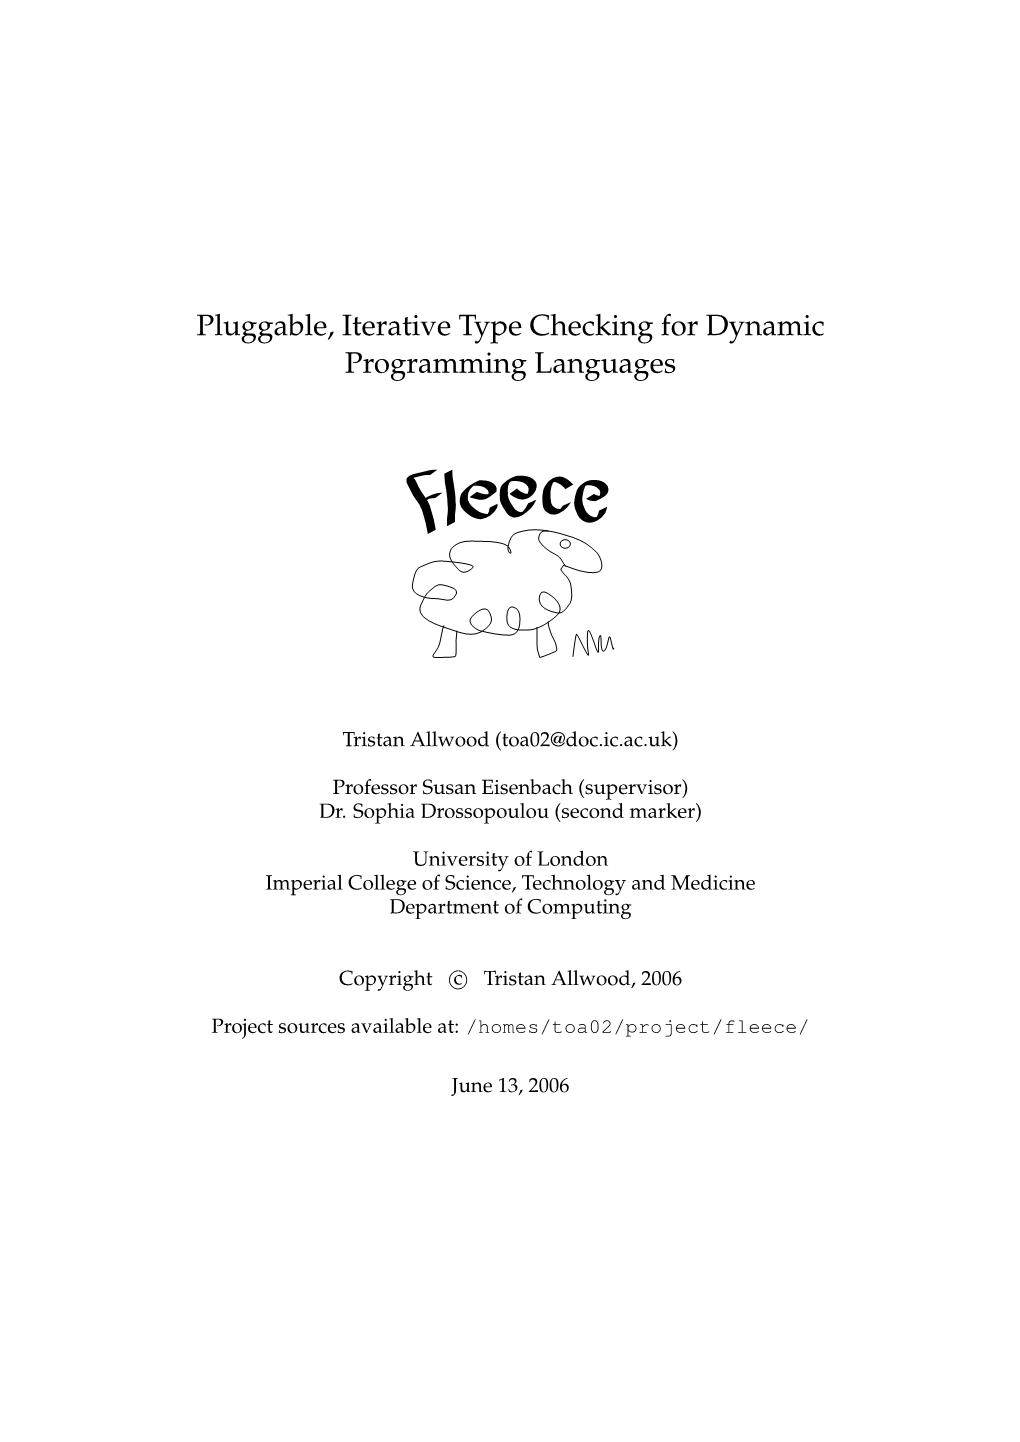 Pluggable, Iterative Type Checking for Dynamic Programming Languages